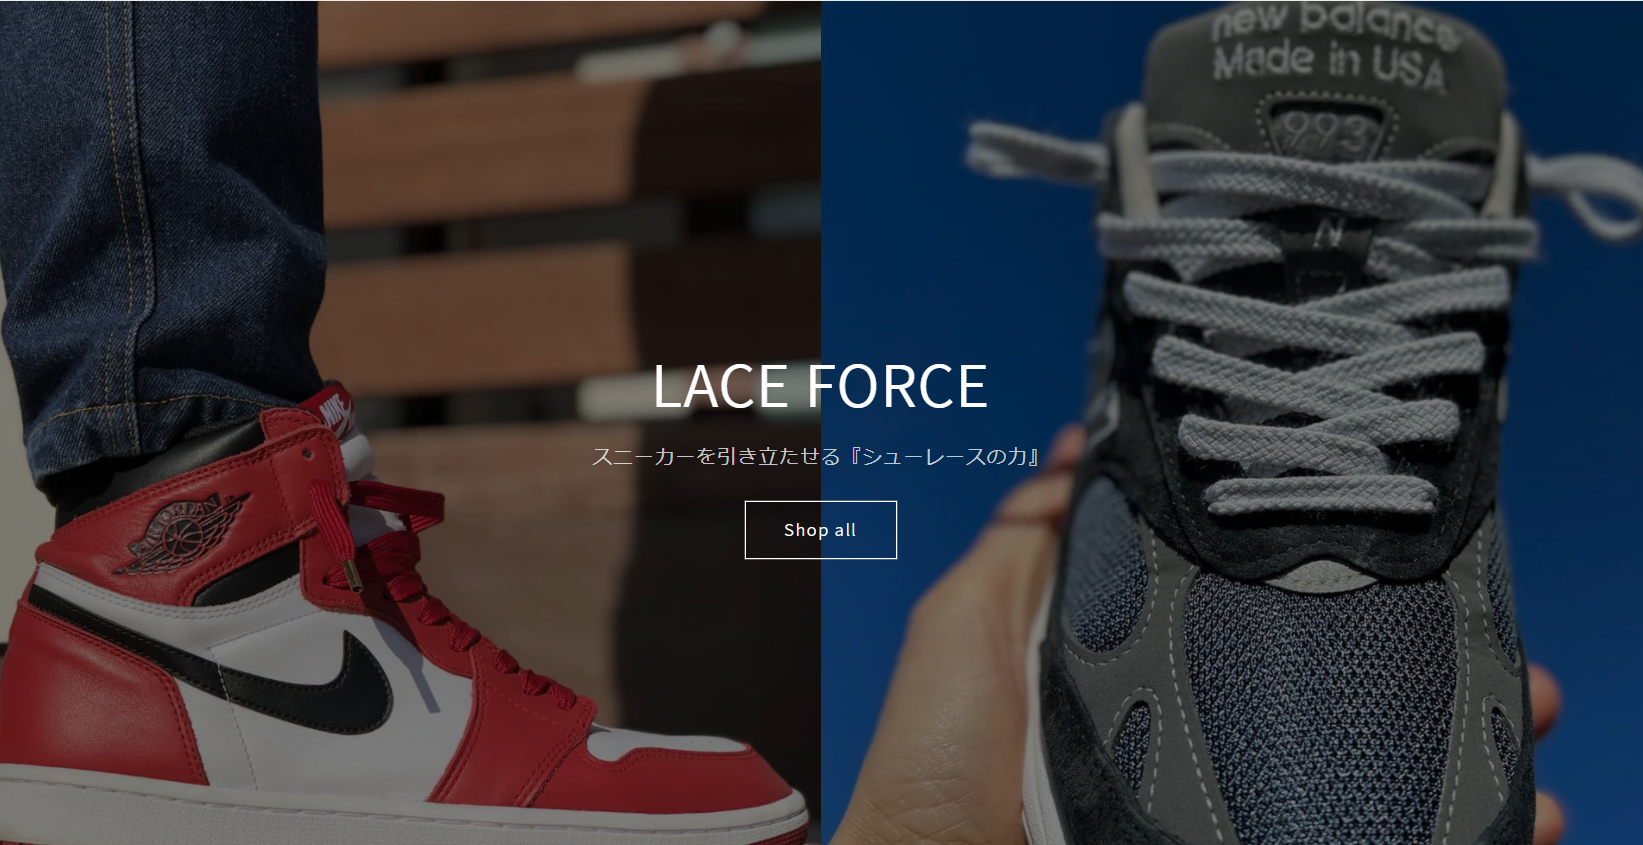 「LACE FORCE」新登場！